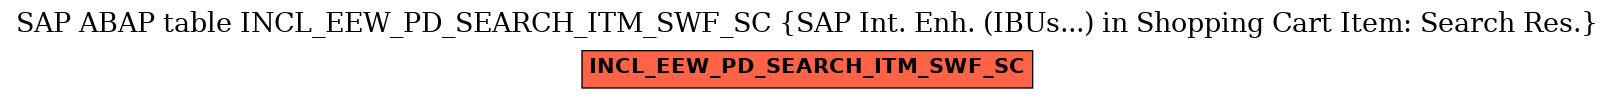 E-R Diagram for table INCL_EEW_PD_SEARCH_ITM_SWF_SC (SAP Int. Enh. (IBUs...) in Shopping Cart Item: Search Res.)